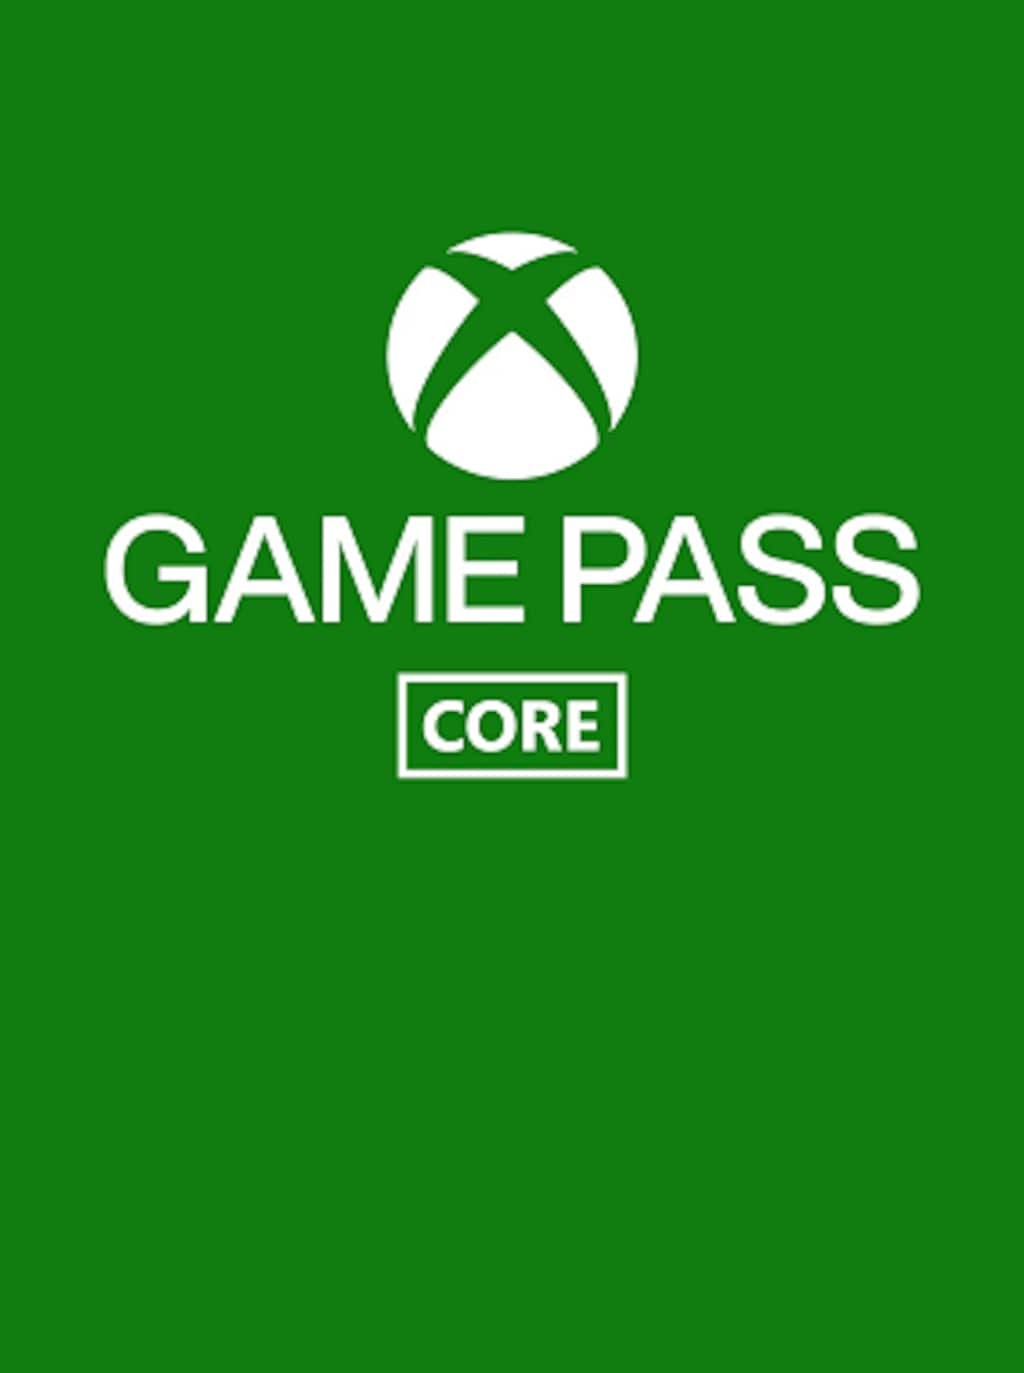 Xbox Game Pass Ultimate on sale: Play on PC and console